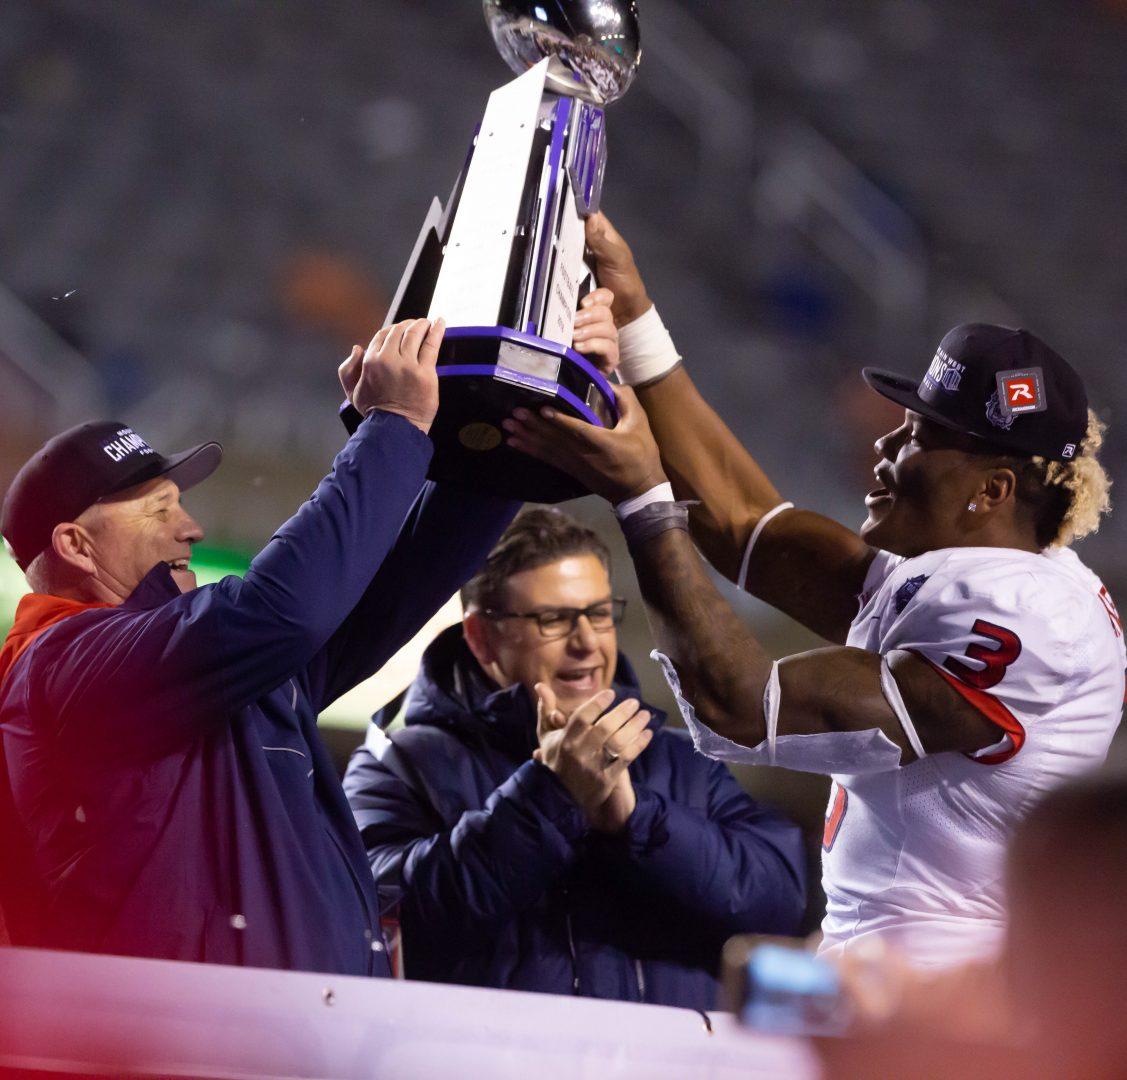 Fresno+State+defensive+end+Mykal+Walker+holds+the+Mountain+West+Championship+trophy+with+head+coach+Jeff+Tedford+as+President+Dr.+Joseph+Castro+cheers%2C+following+the+Dogs+win+over+Boise+on+the+blue+turf.+%28Jose+Romo%2FThe+Collegian%29